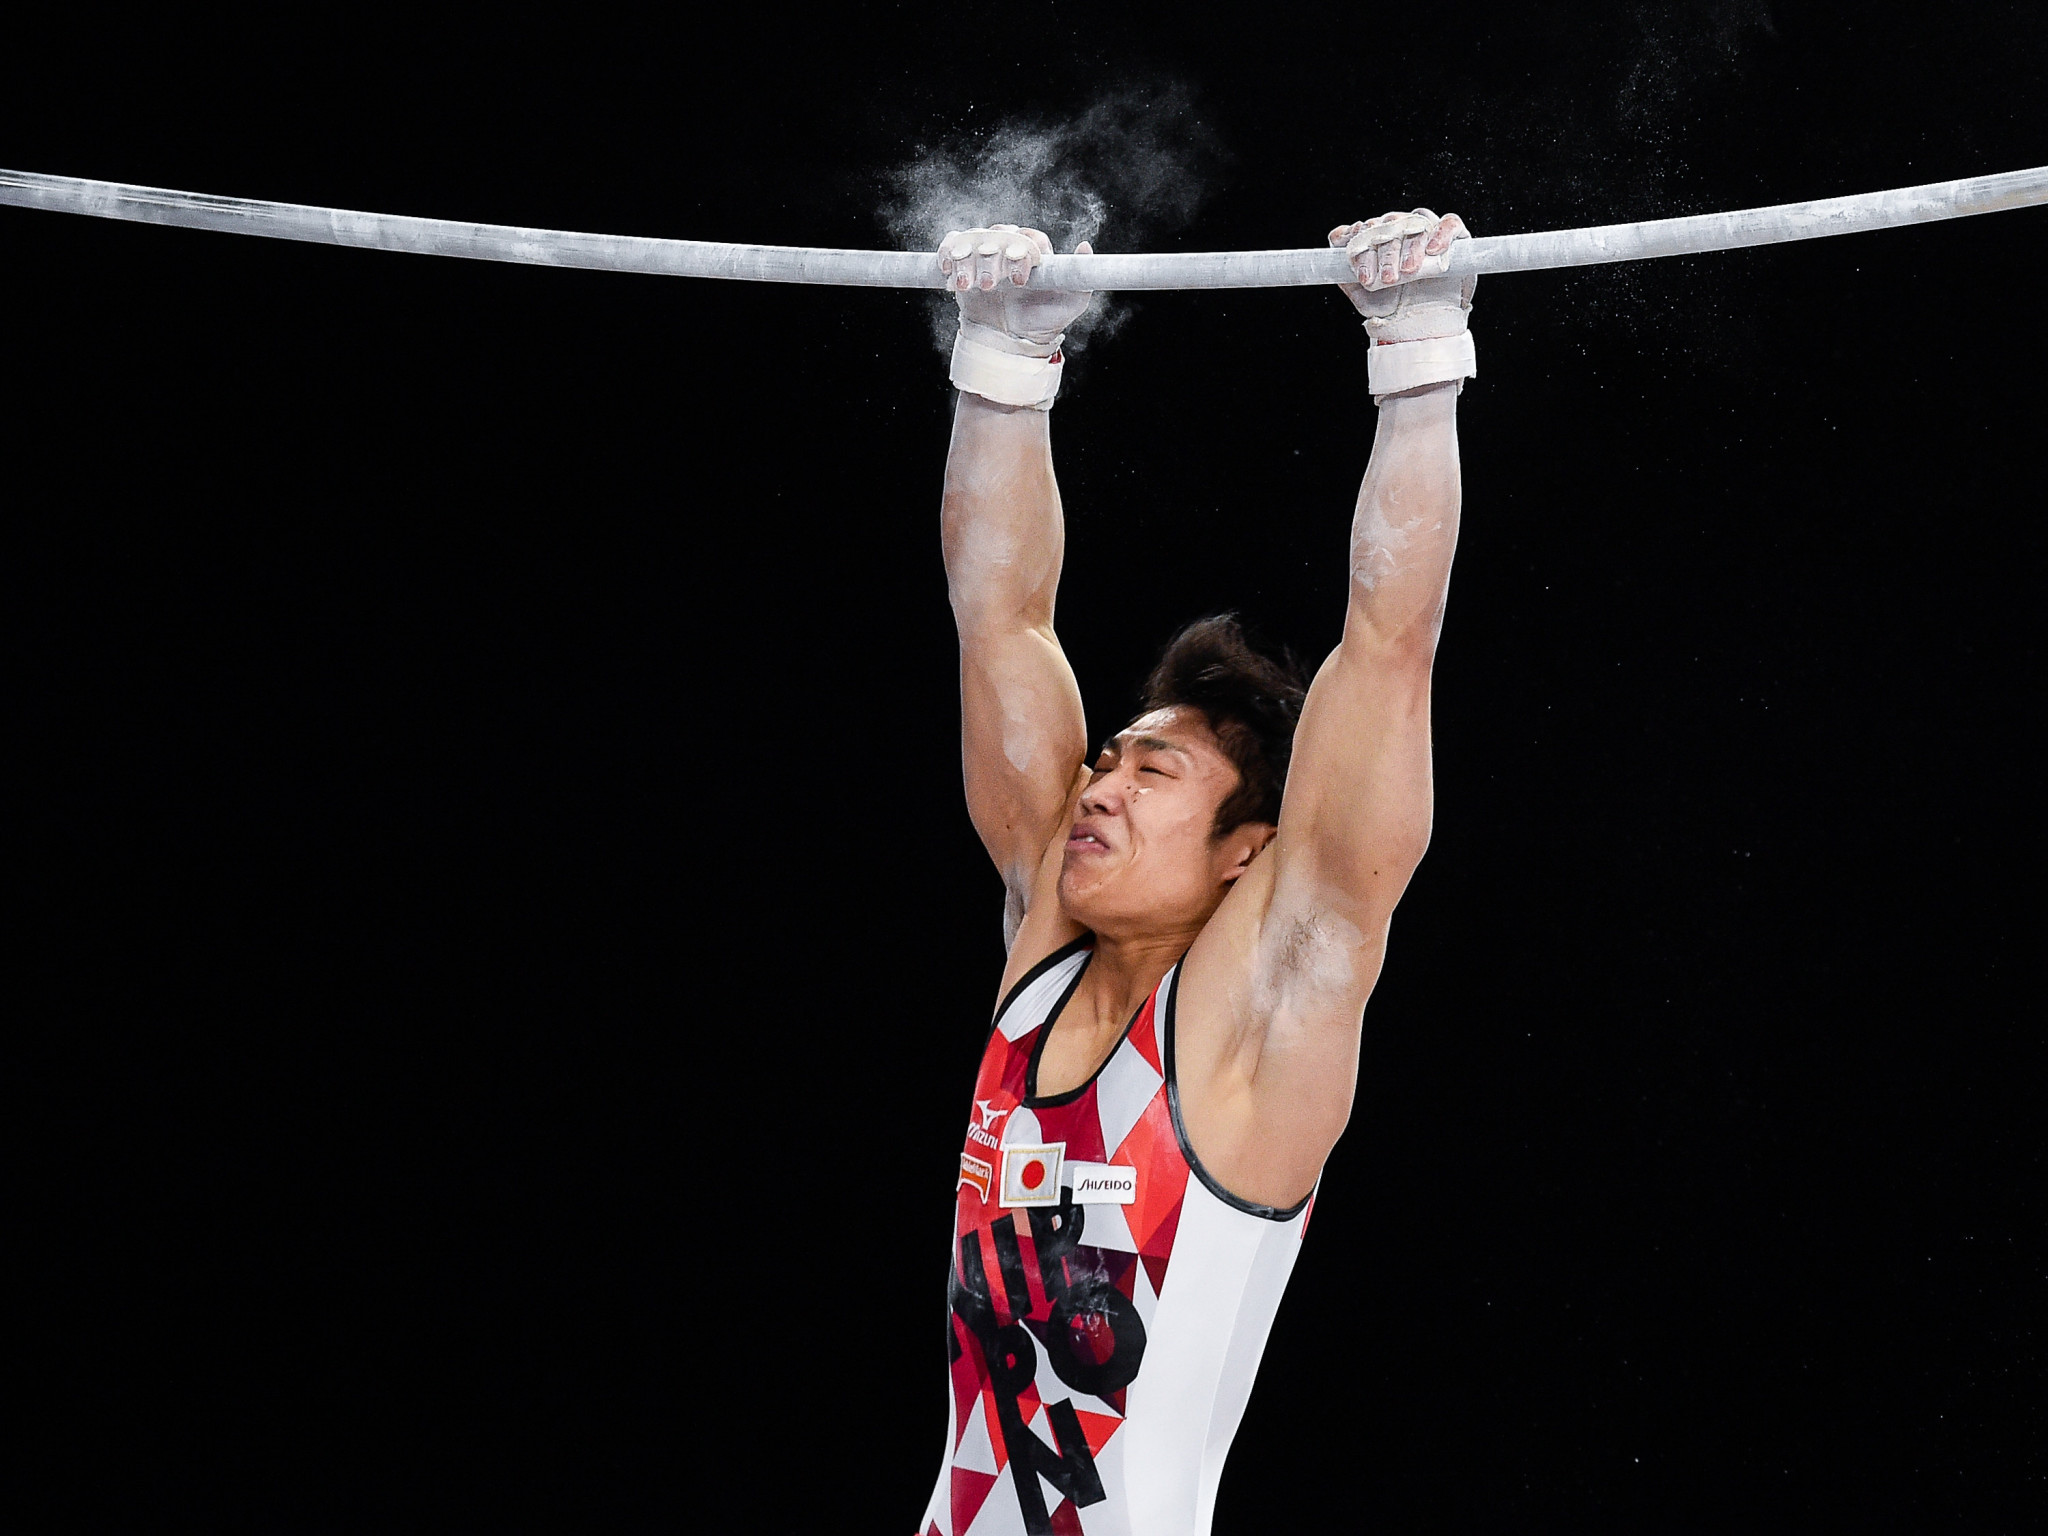 Japan's Hidetaka Miyachi triumphed in the men's horizontal bar event ©Getty Images